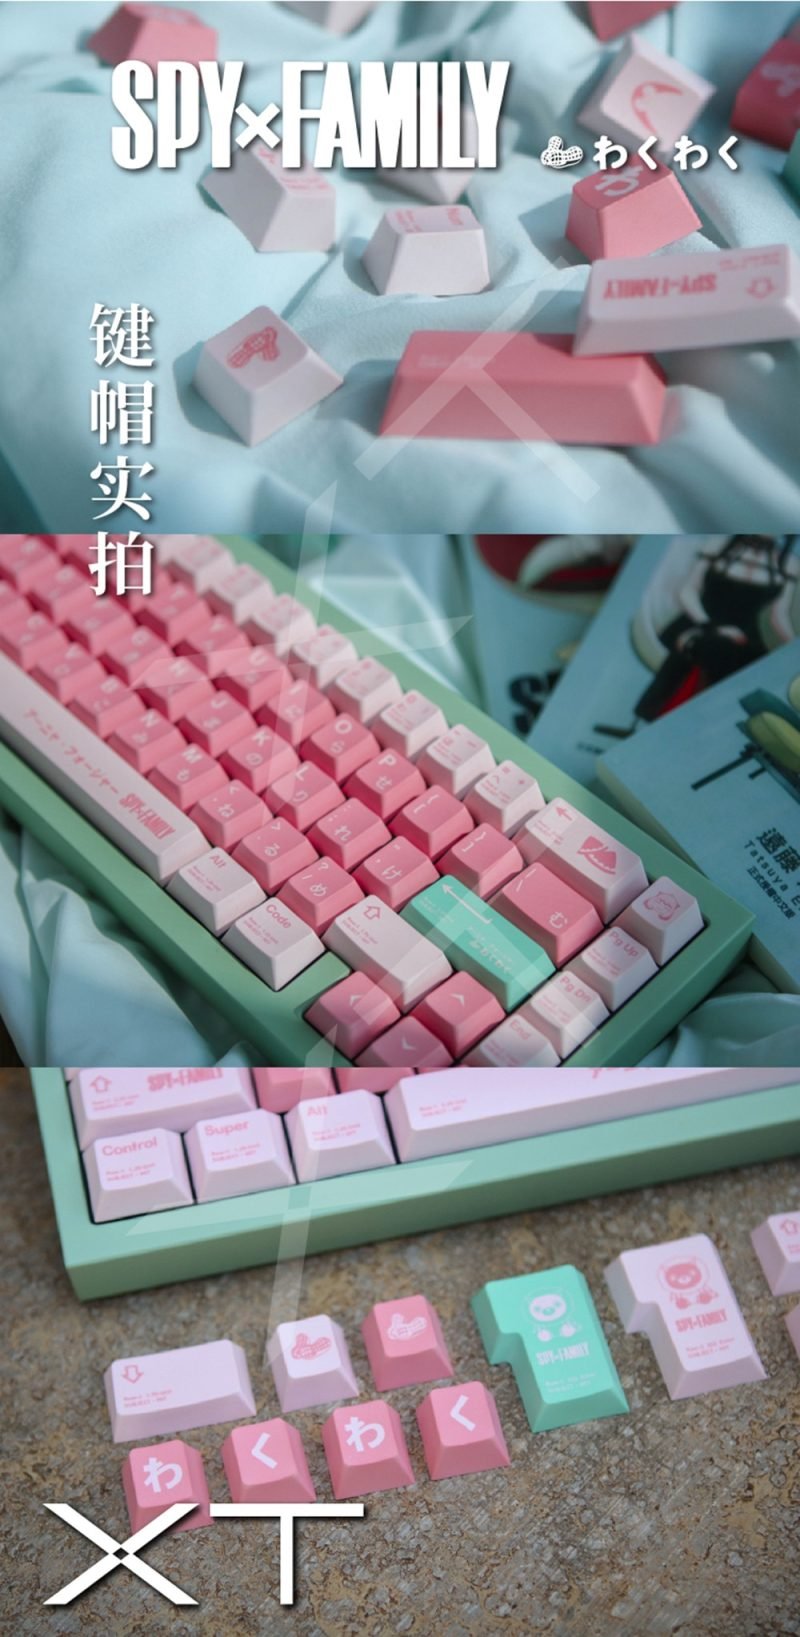 Japanese Pink Keycaps Set with Spy x Family Anime Design